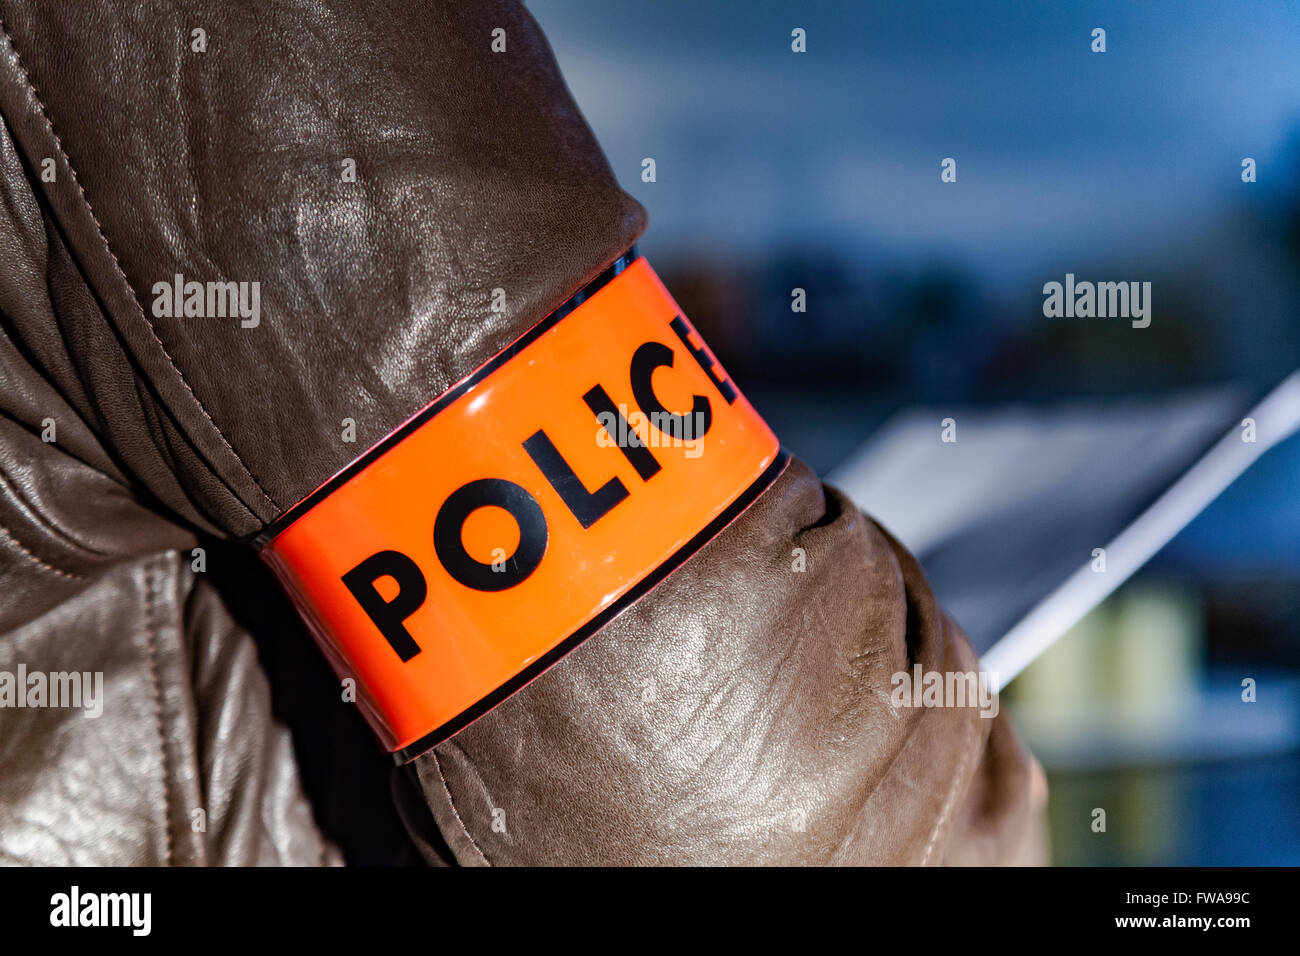 Police Armband High Resolution Stock Photography and Images - Alamy